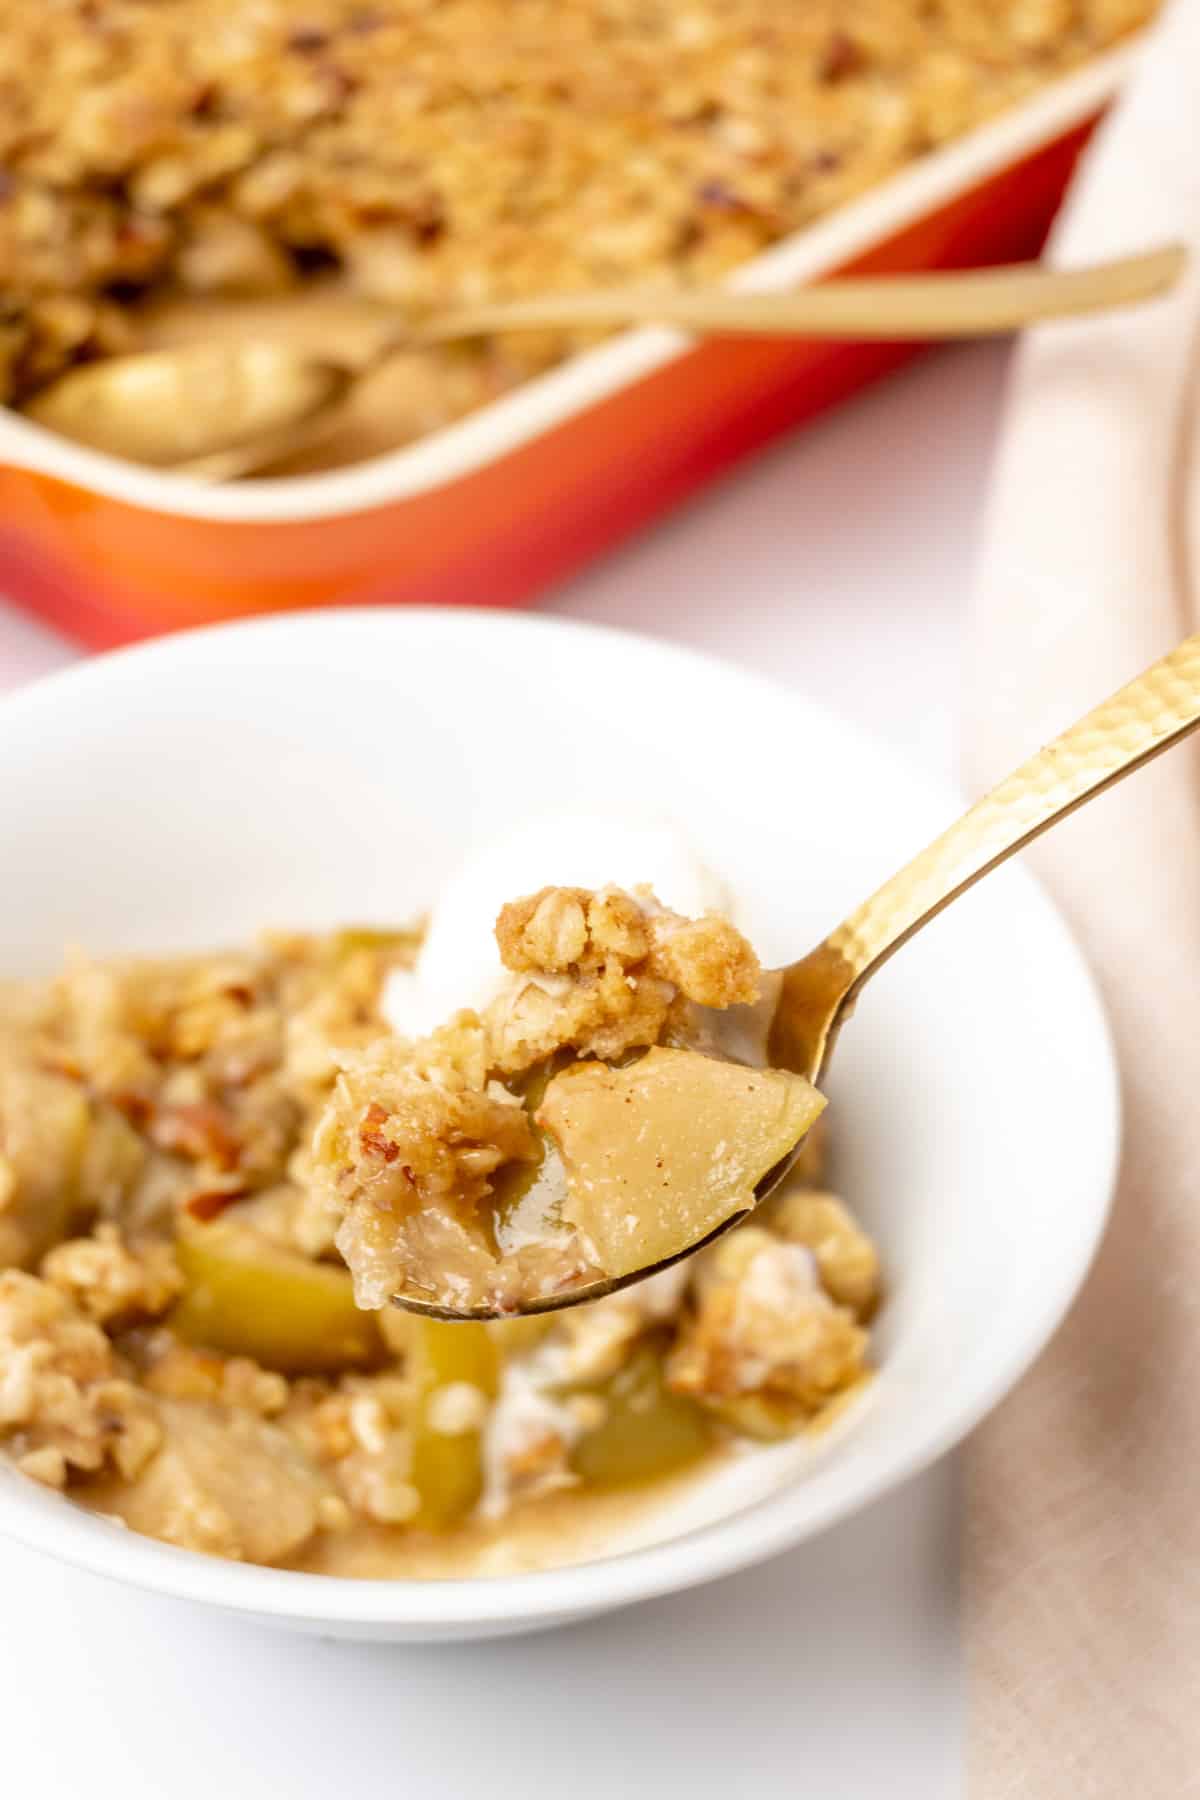 Juicy, tender apple pieces with crispy oat topping on a spoon.